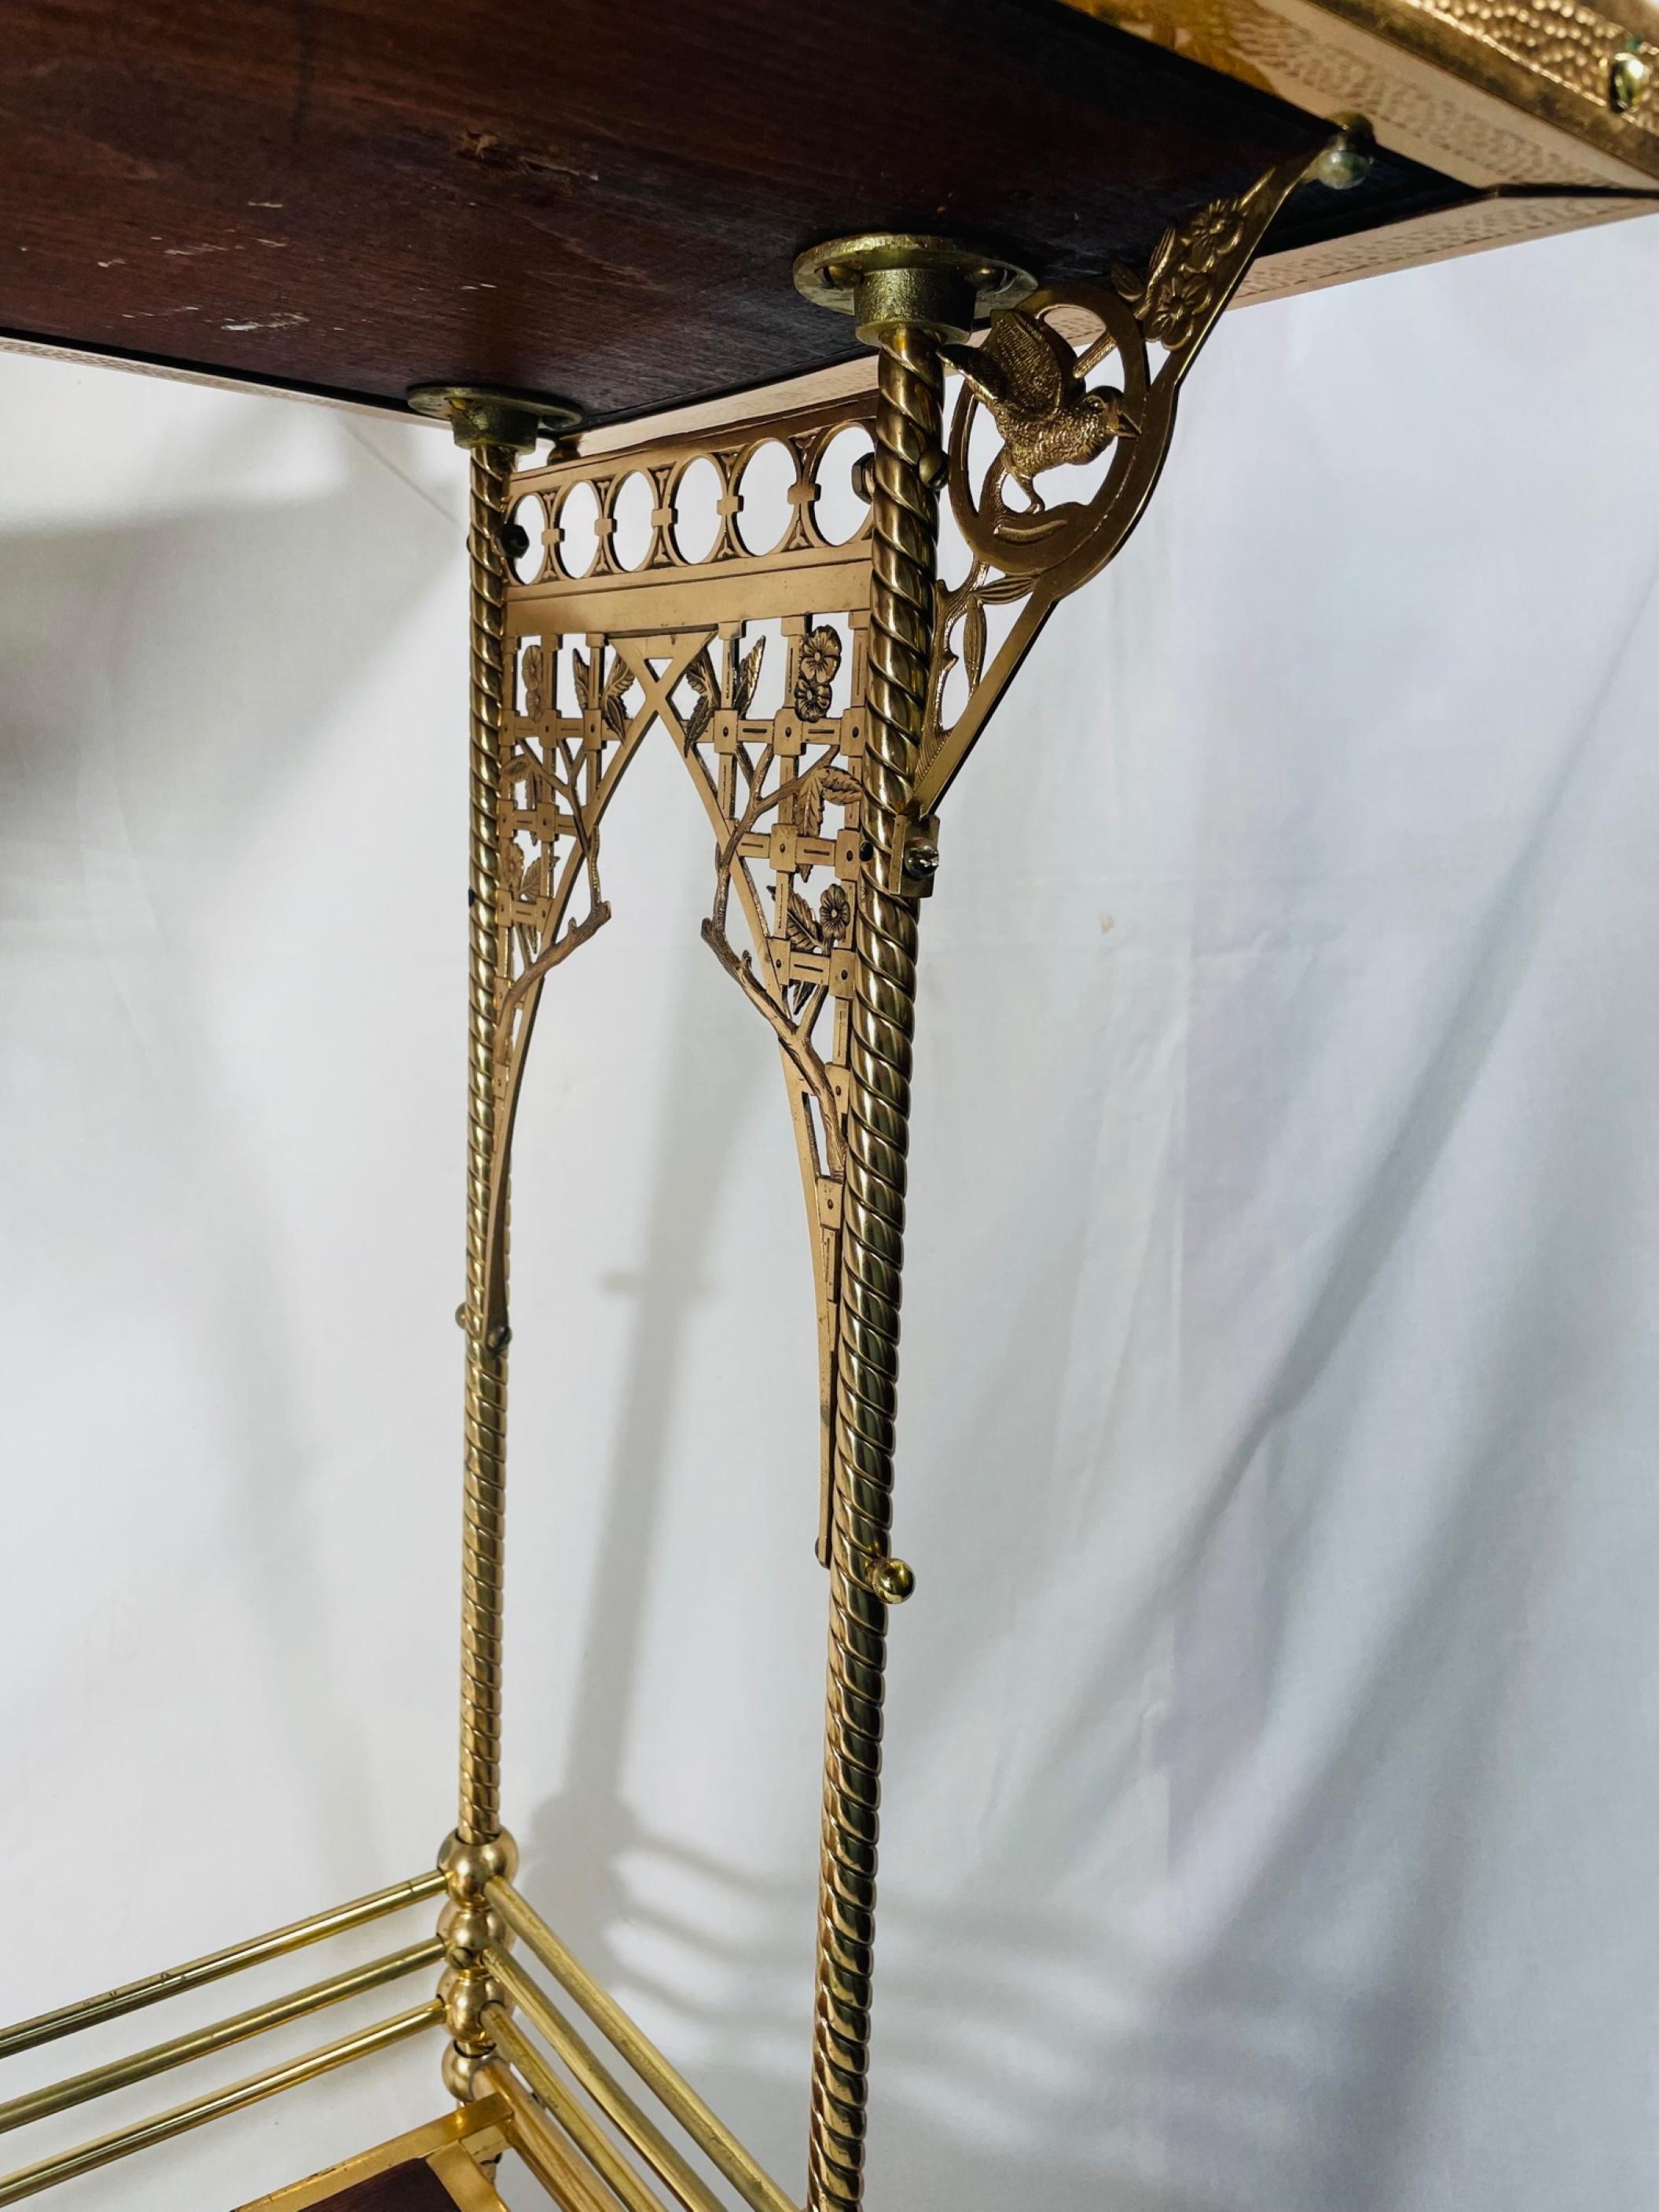 19th Century Charles Parker Aesthetic Movement Brass Telephone Table Stand, ca. 1880